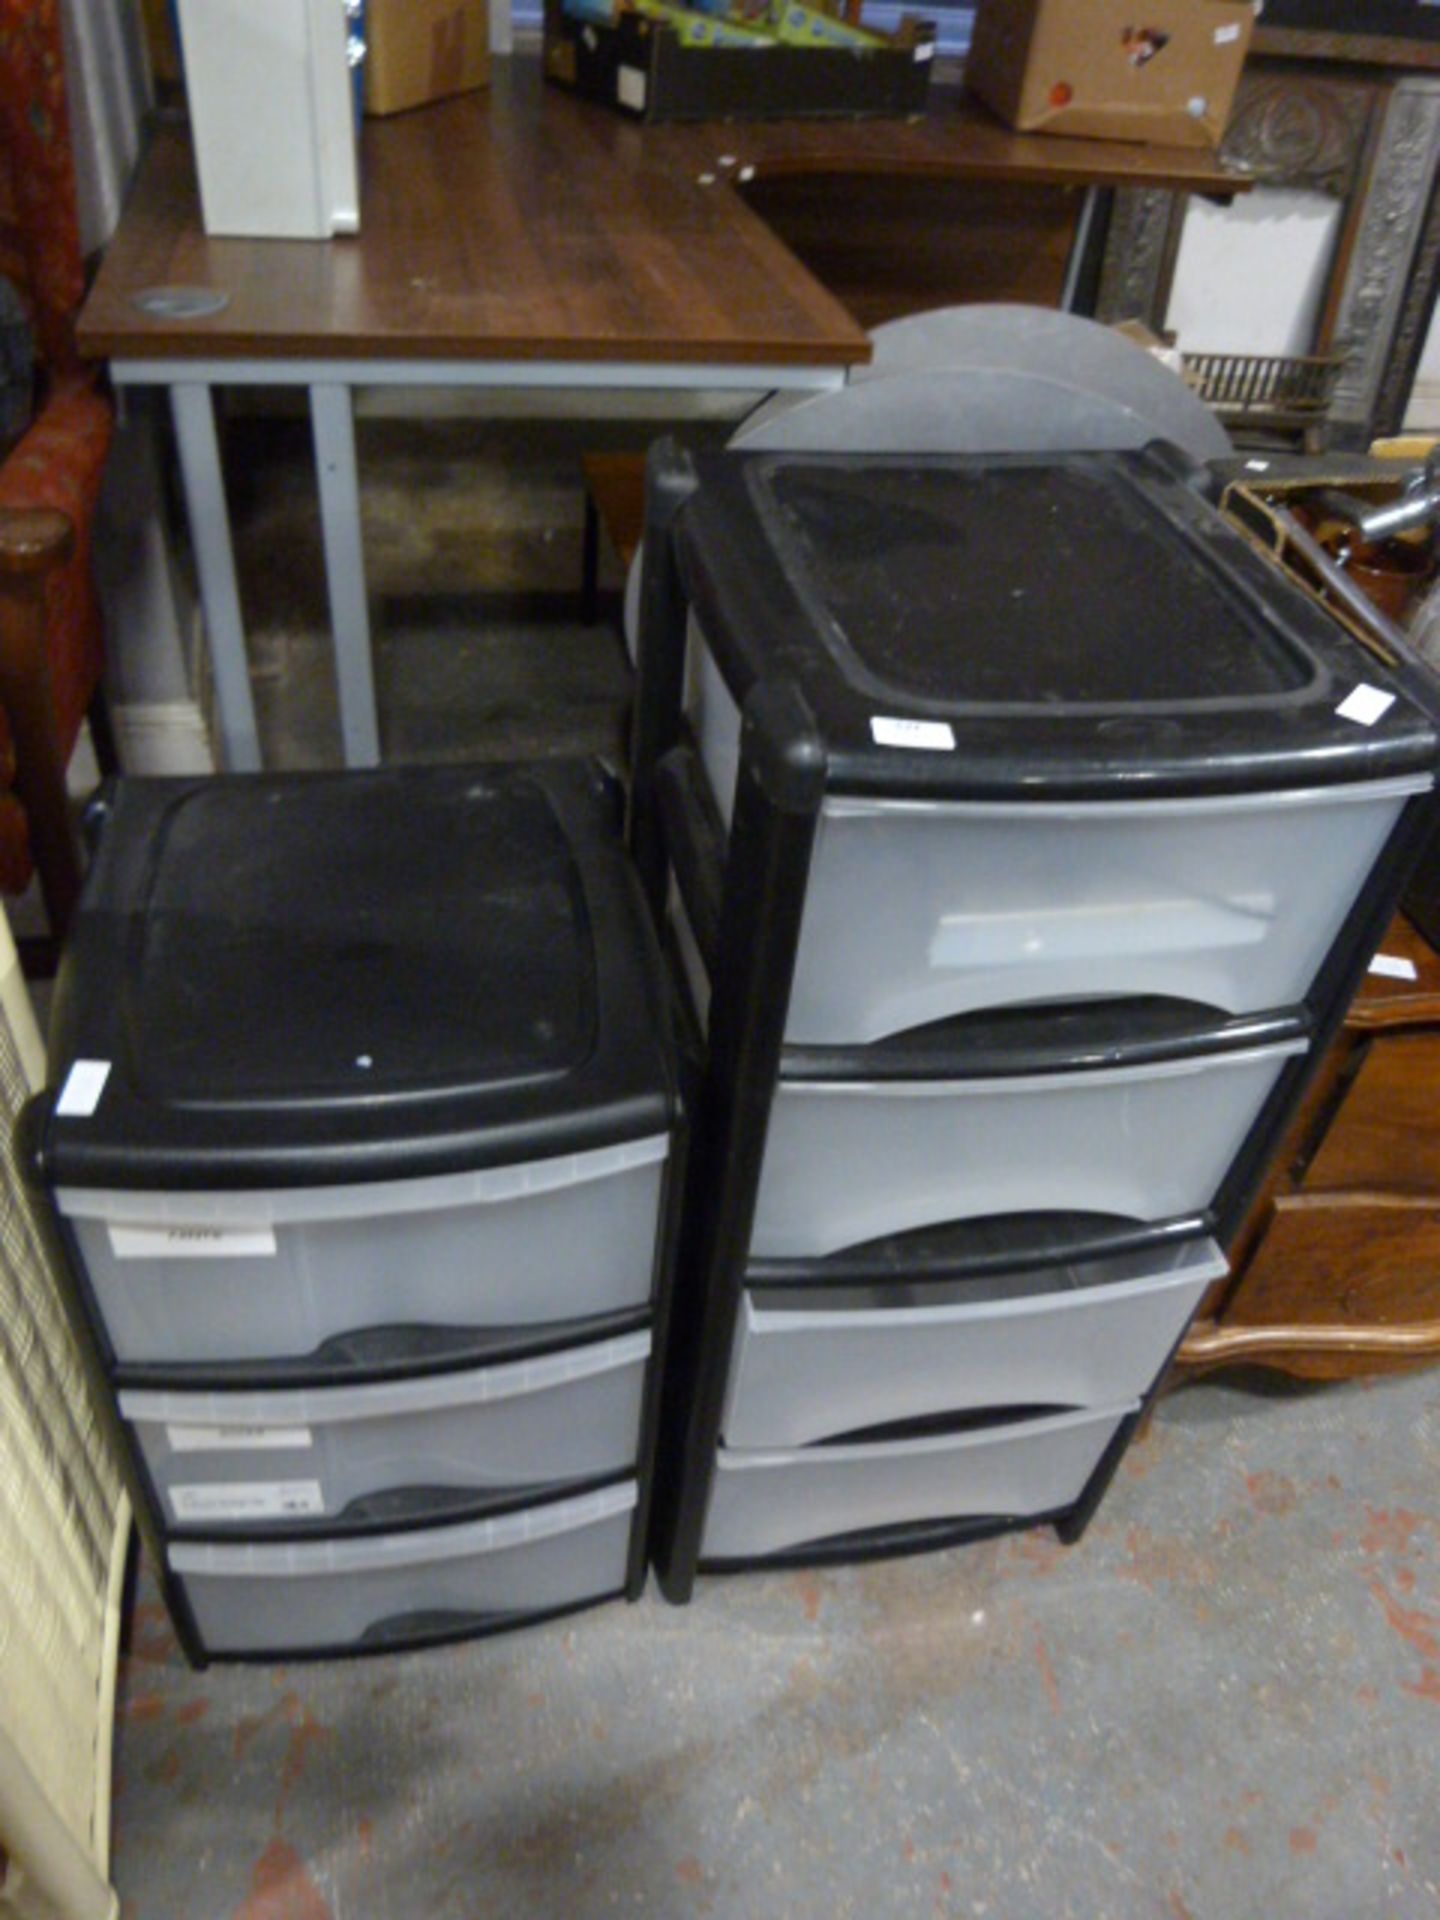 Set of Three and a Set of Four Plastic Drawers